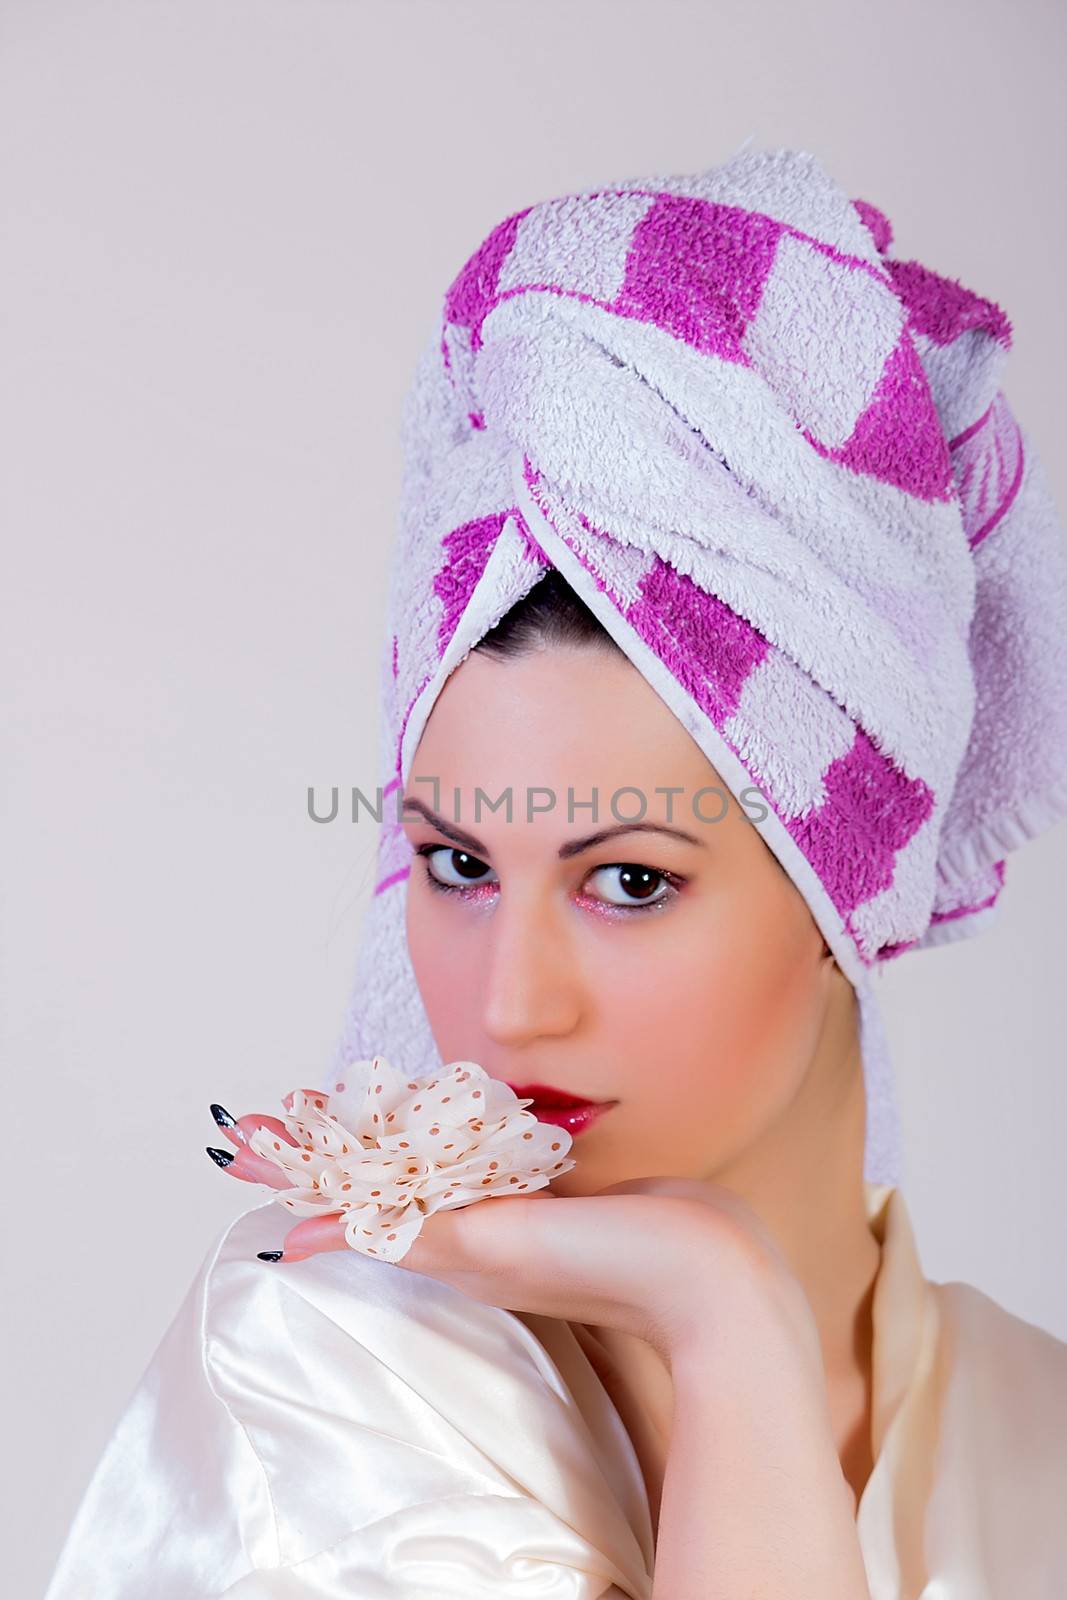 portrait of young beautiful woman with towel on her head